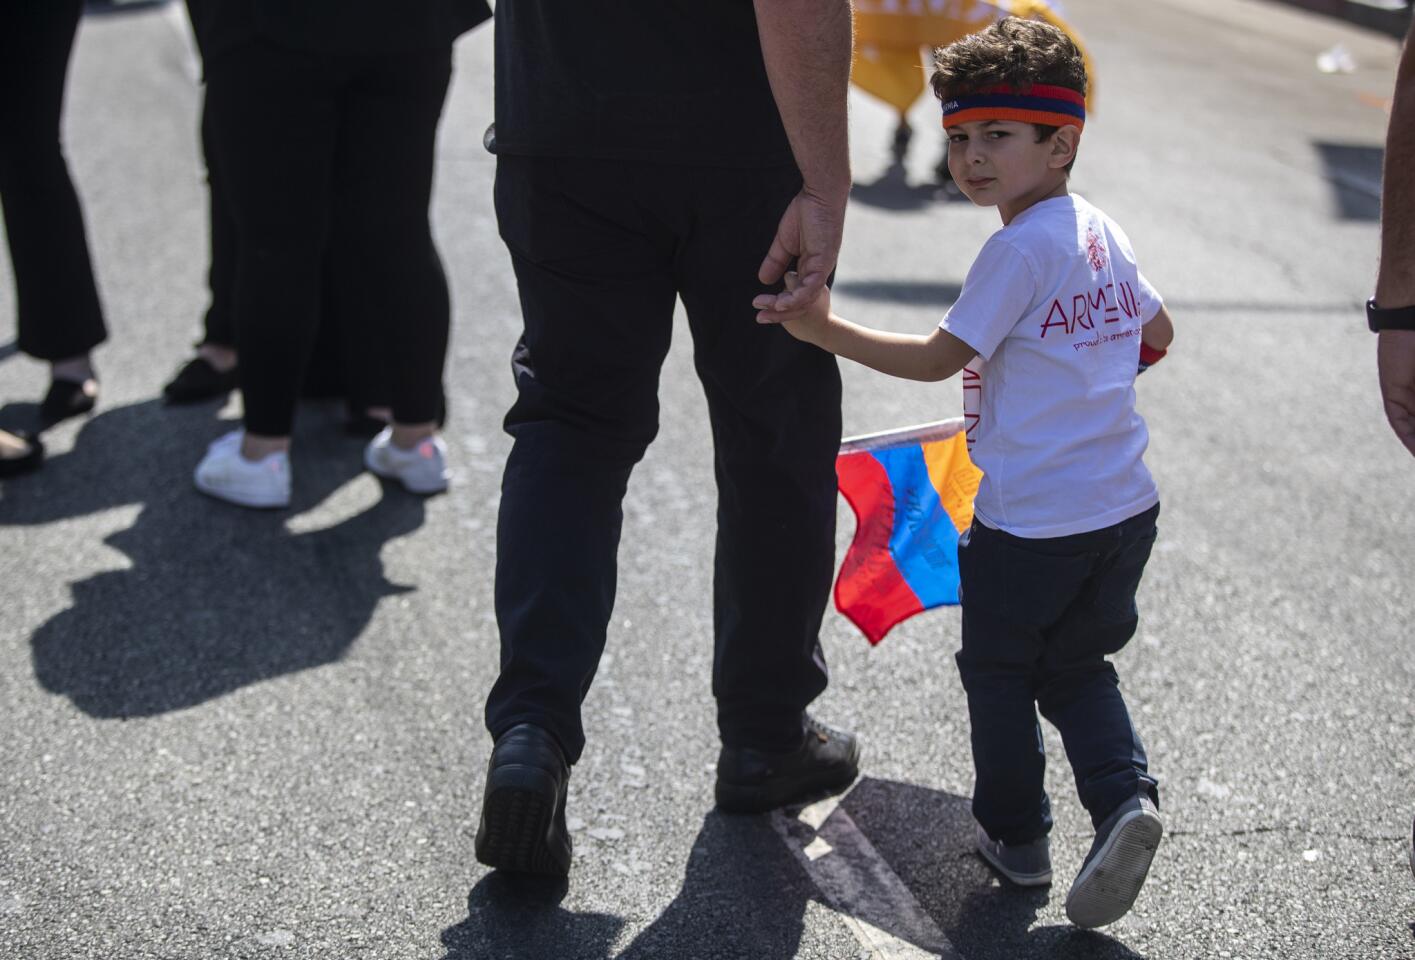 More than 200,000 people of Armenian descent live in Los Angeles County, according to U.S. census data.